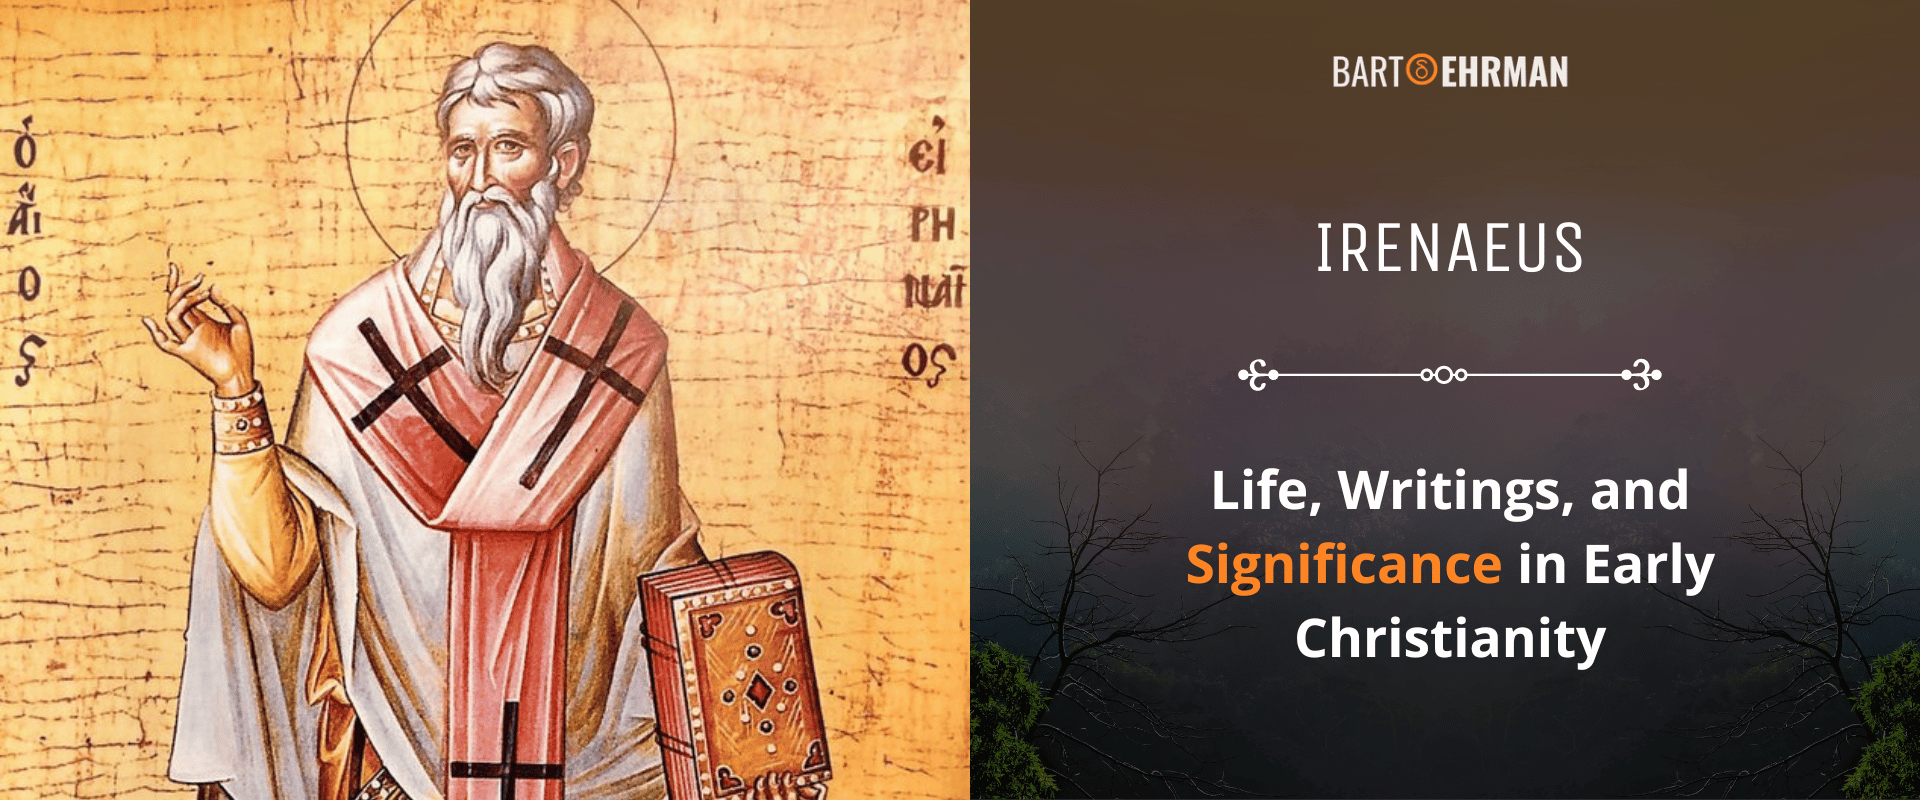 Irenaeus - Life, Writings, and Significance in Early Christianity